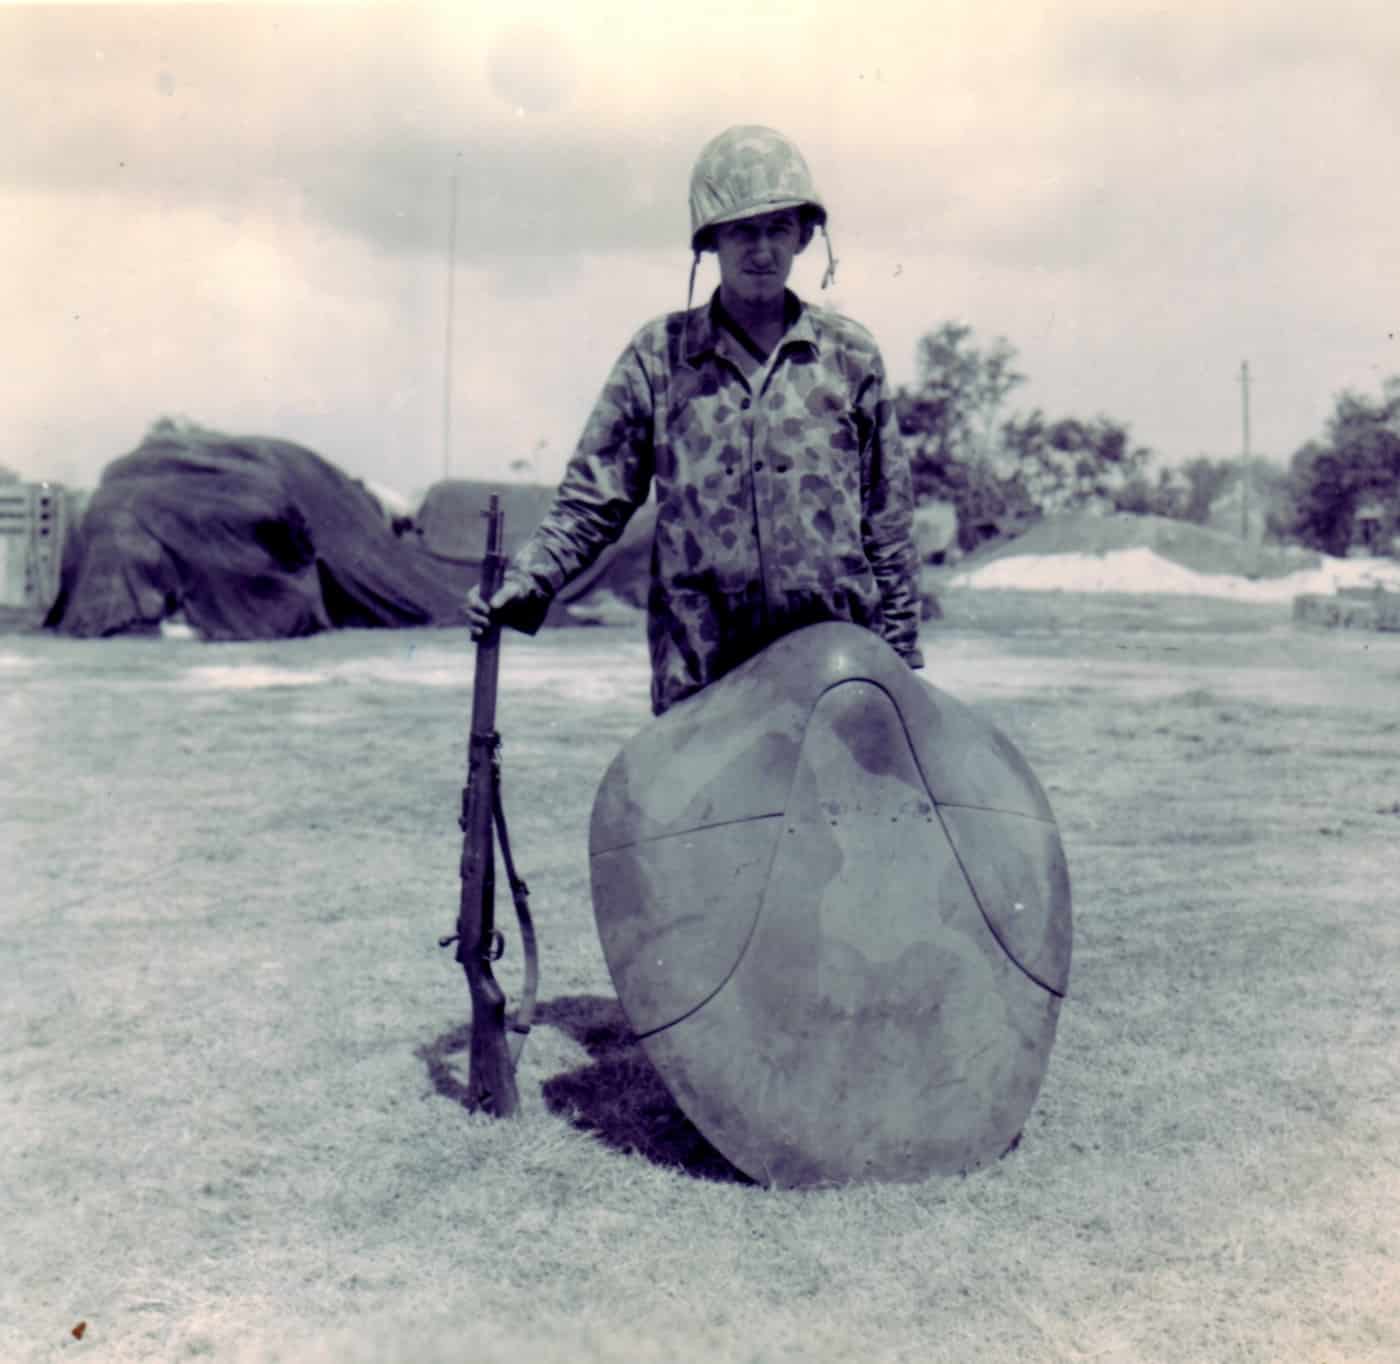 In this photo we see a United States Marine with a Japanese turtle shell cape that was designed to stop bullets and was also capable of stopping flak and debris.